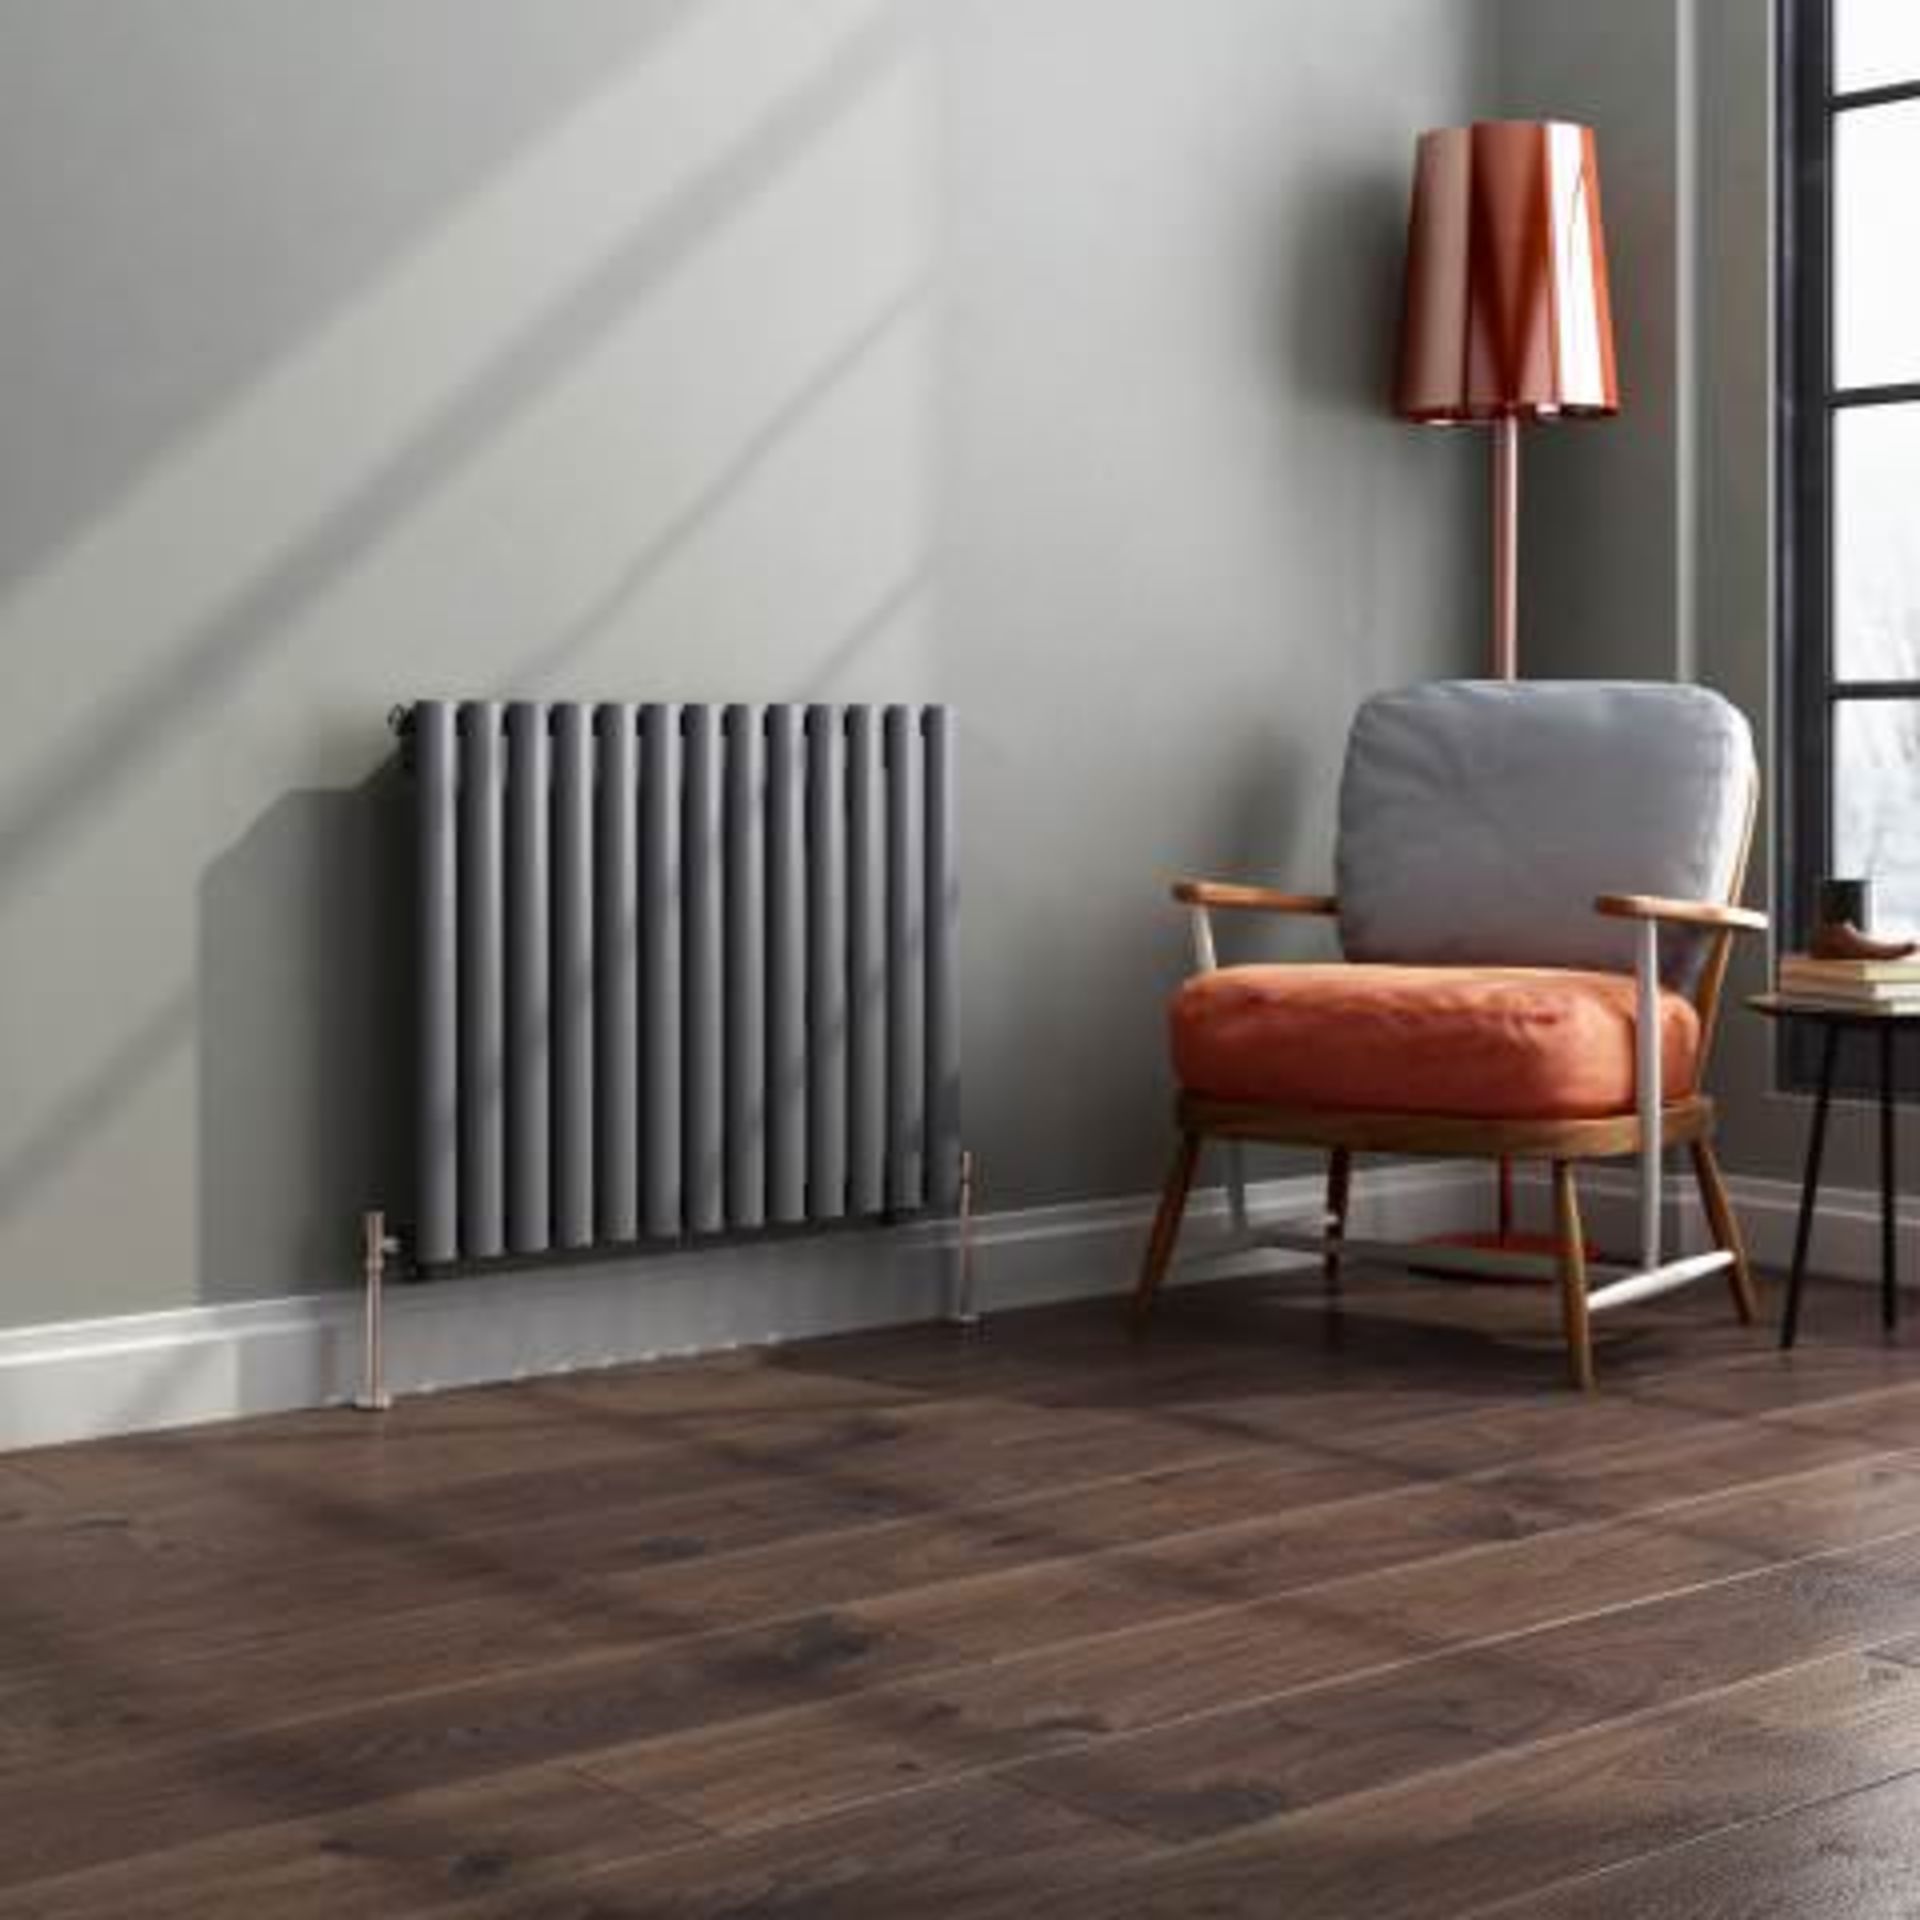 (I41)600x780mm Anthracite Single Panel Oval Tube Horizontal Radiator RRP £167.99 Designer Touch This - Image 2 of 3